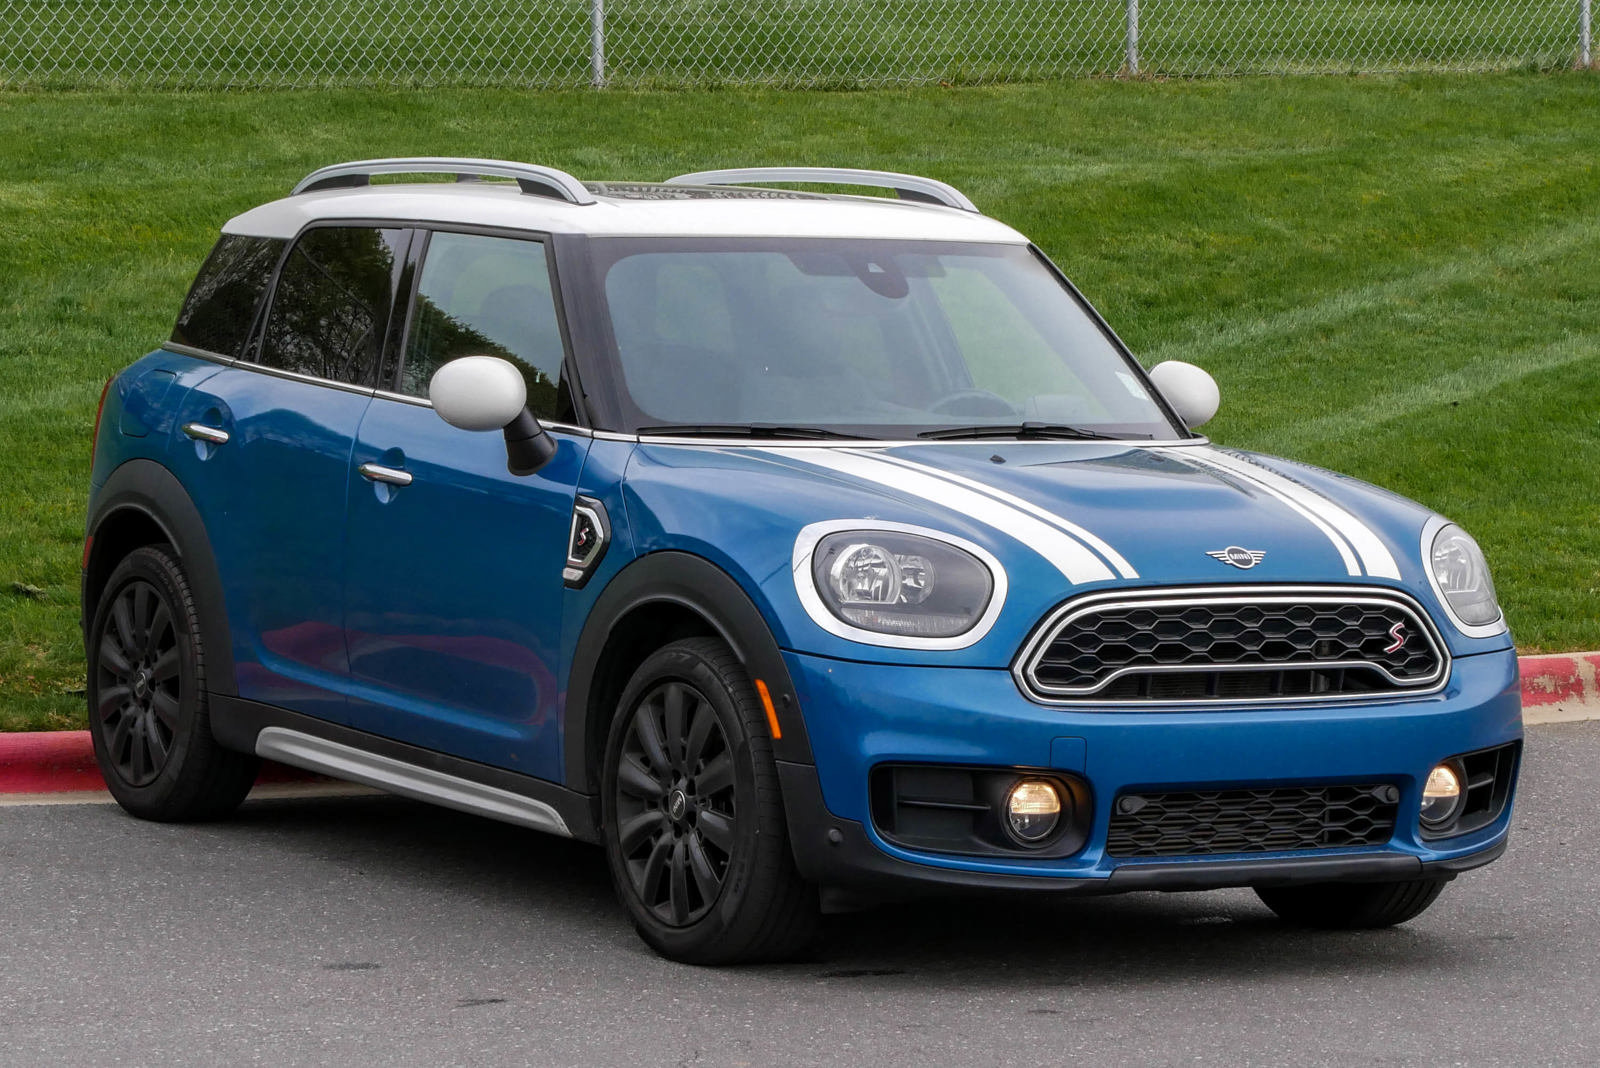 Certified Pre-Owned 2019 MINI Countryman FWD Cooper S in Buford #PSM4126 |  Mall of Georgia MINI